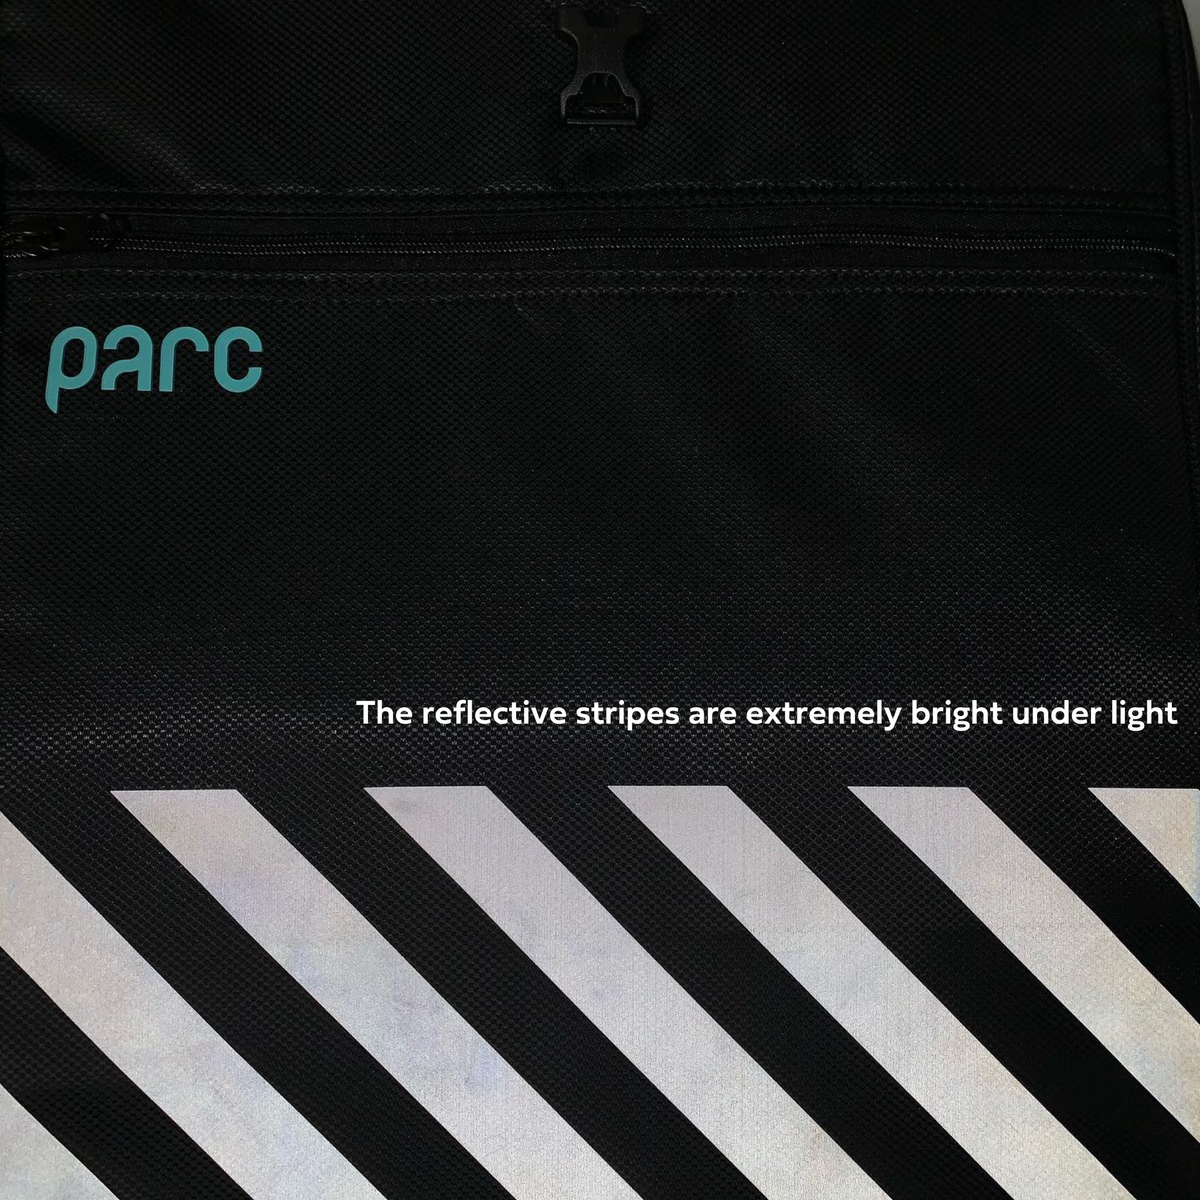 Close up view of exterior of Parc cycling gear bag showing reflective stripes glowing under light in dark. Normally black stripes appear bright white under light. Parc turquoise logo visible on cycling kit bag.